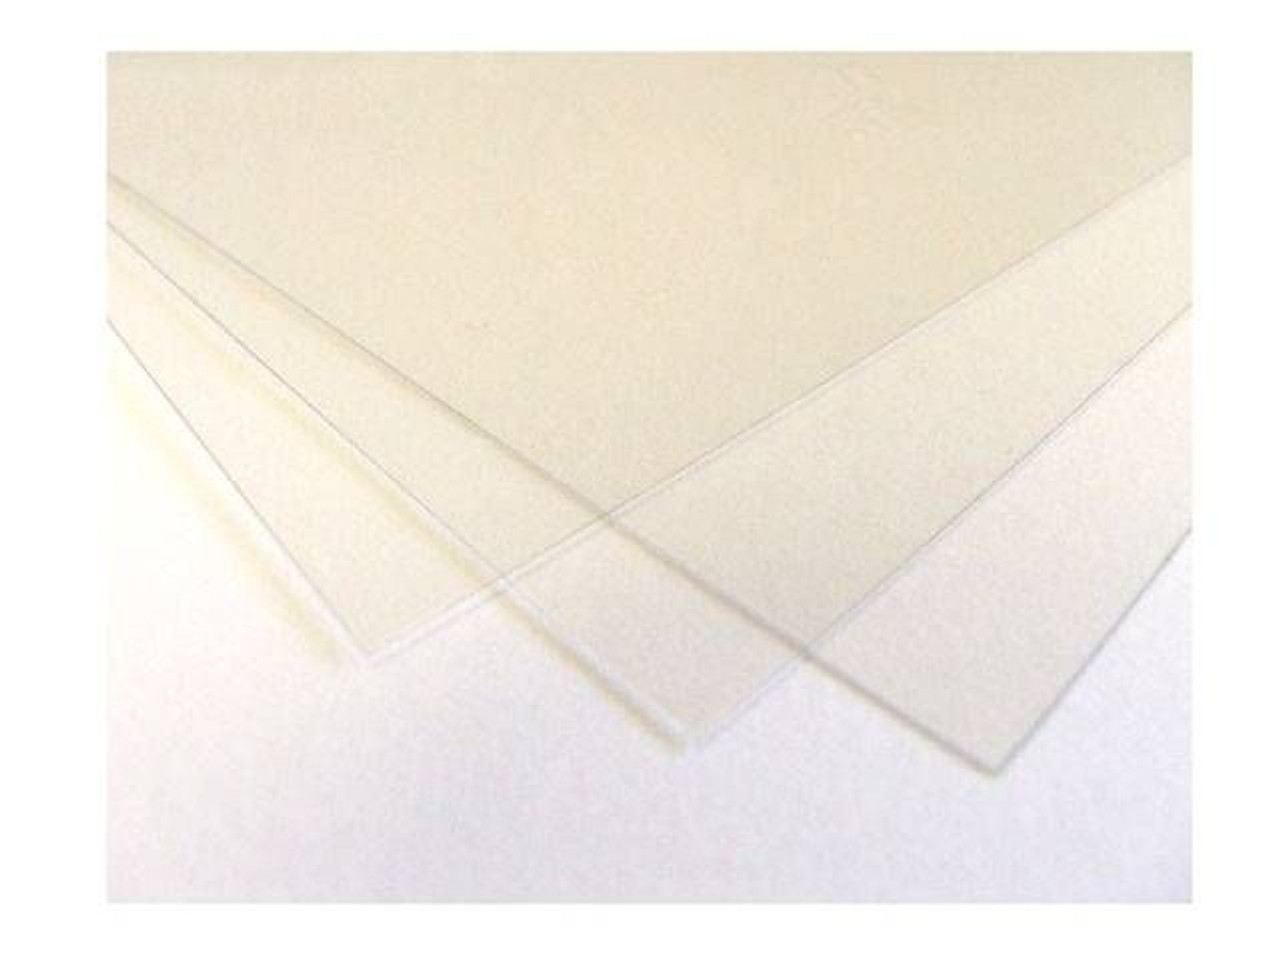  Heat Resistant Clear Acetate Sheets for Making Shaker